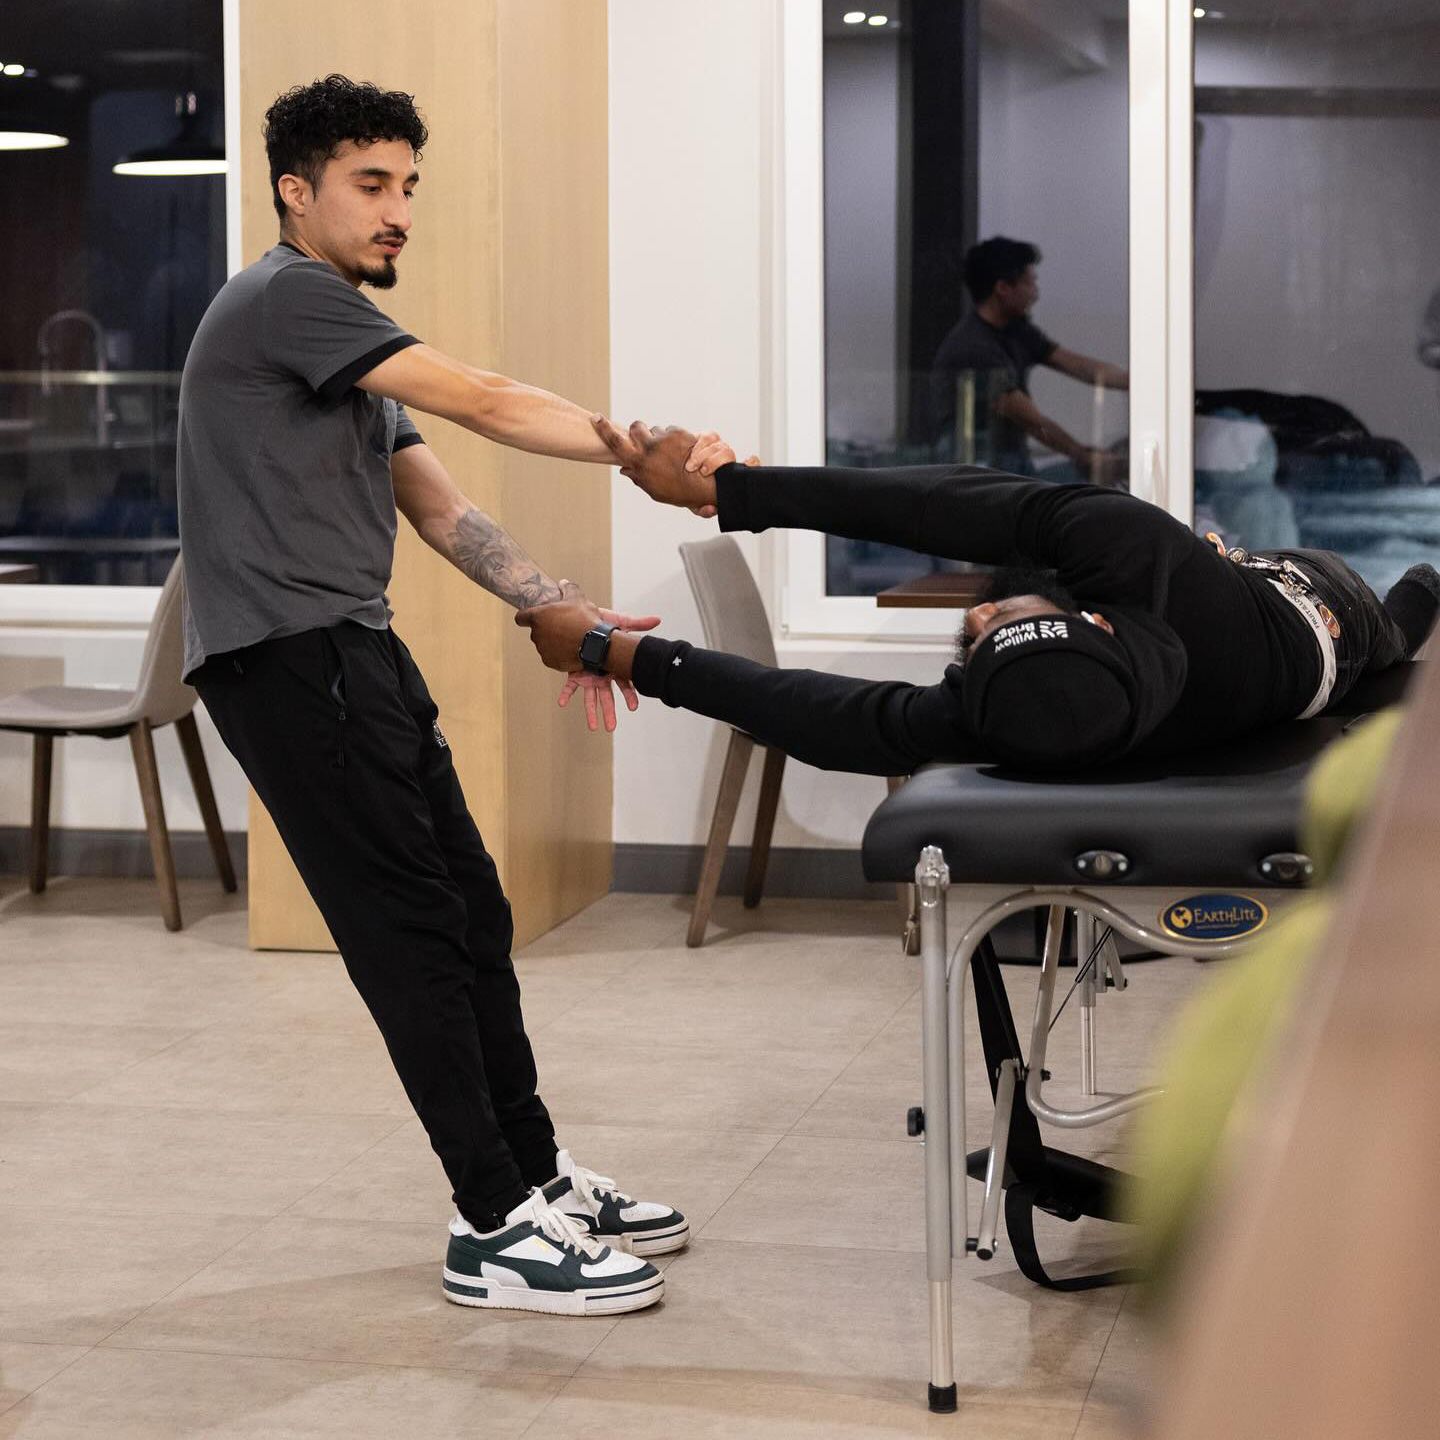 A man is stretching another man 's leg on a table